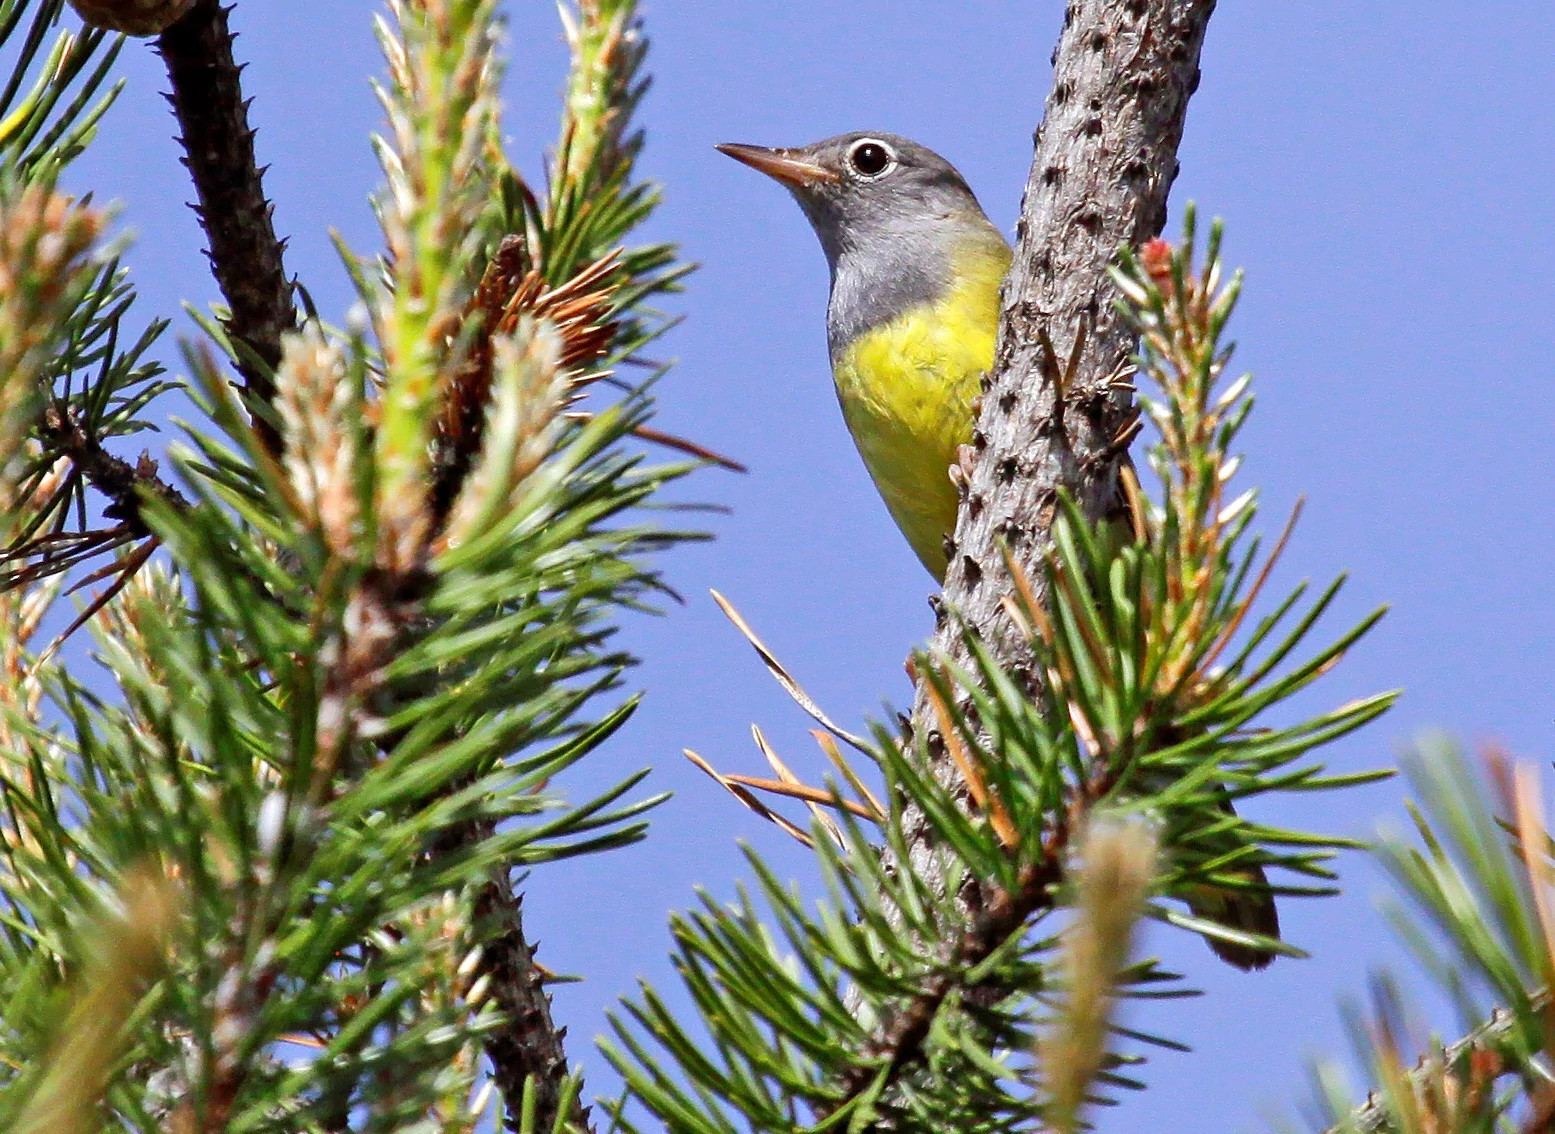 Connecticut warbler perched in a branch